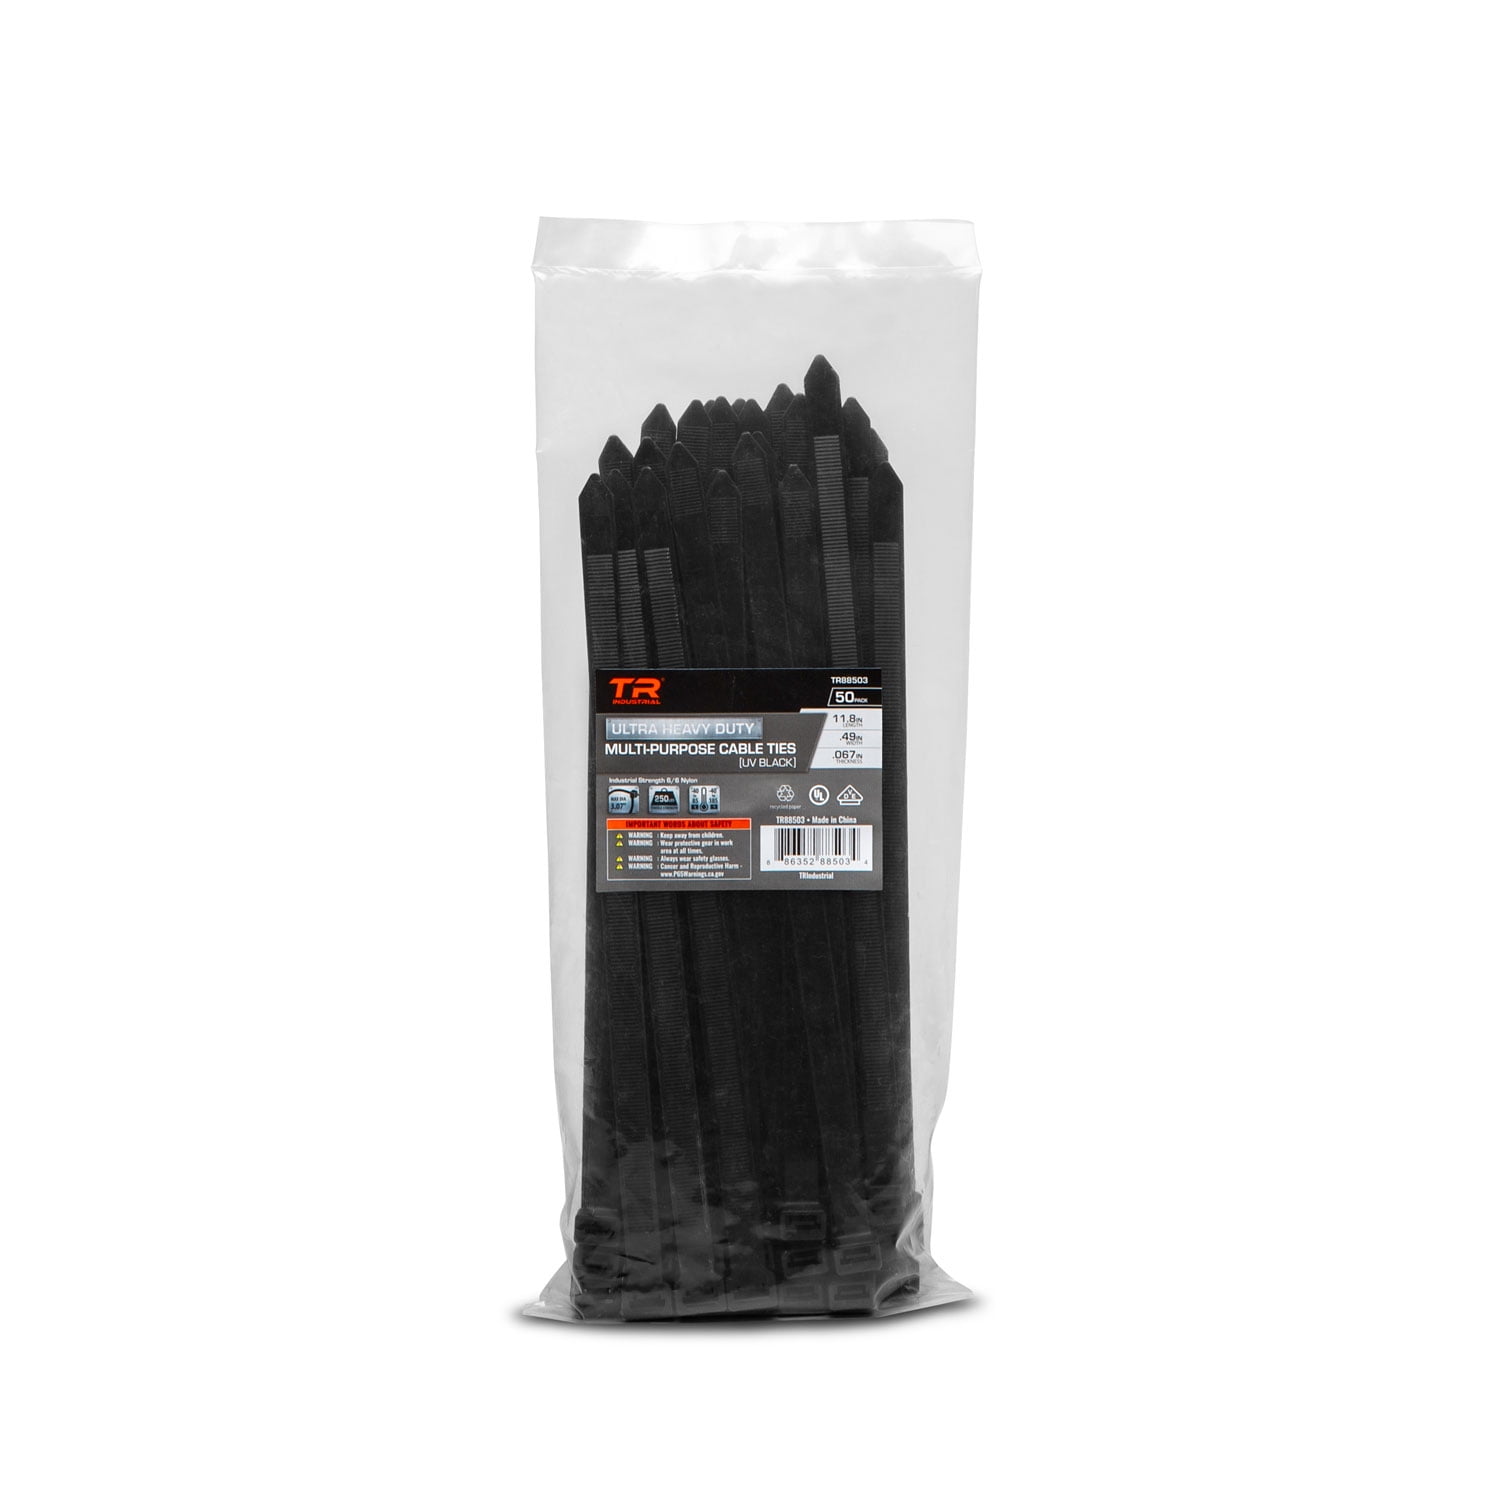 500 PACK 8 INCH ZIP TIES NYLON BLACK 50 LBS UV WEATHER RESISTANT WIRE CABLE US 